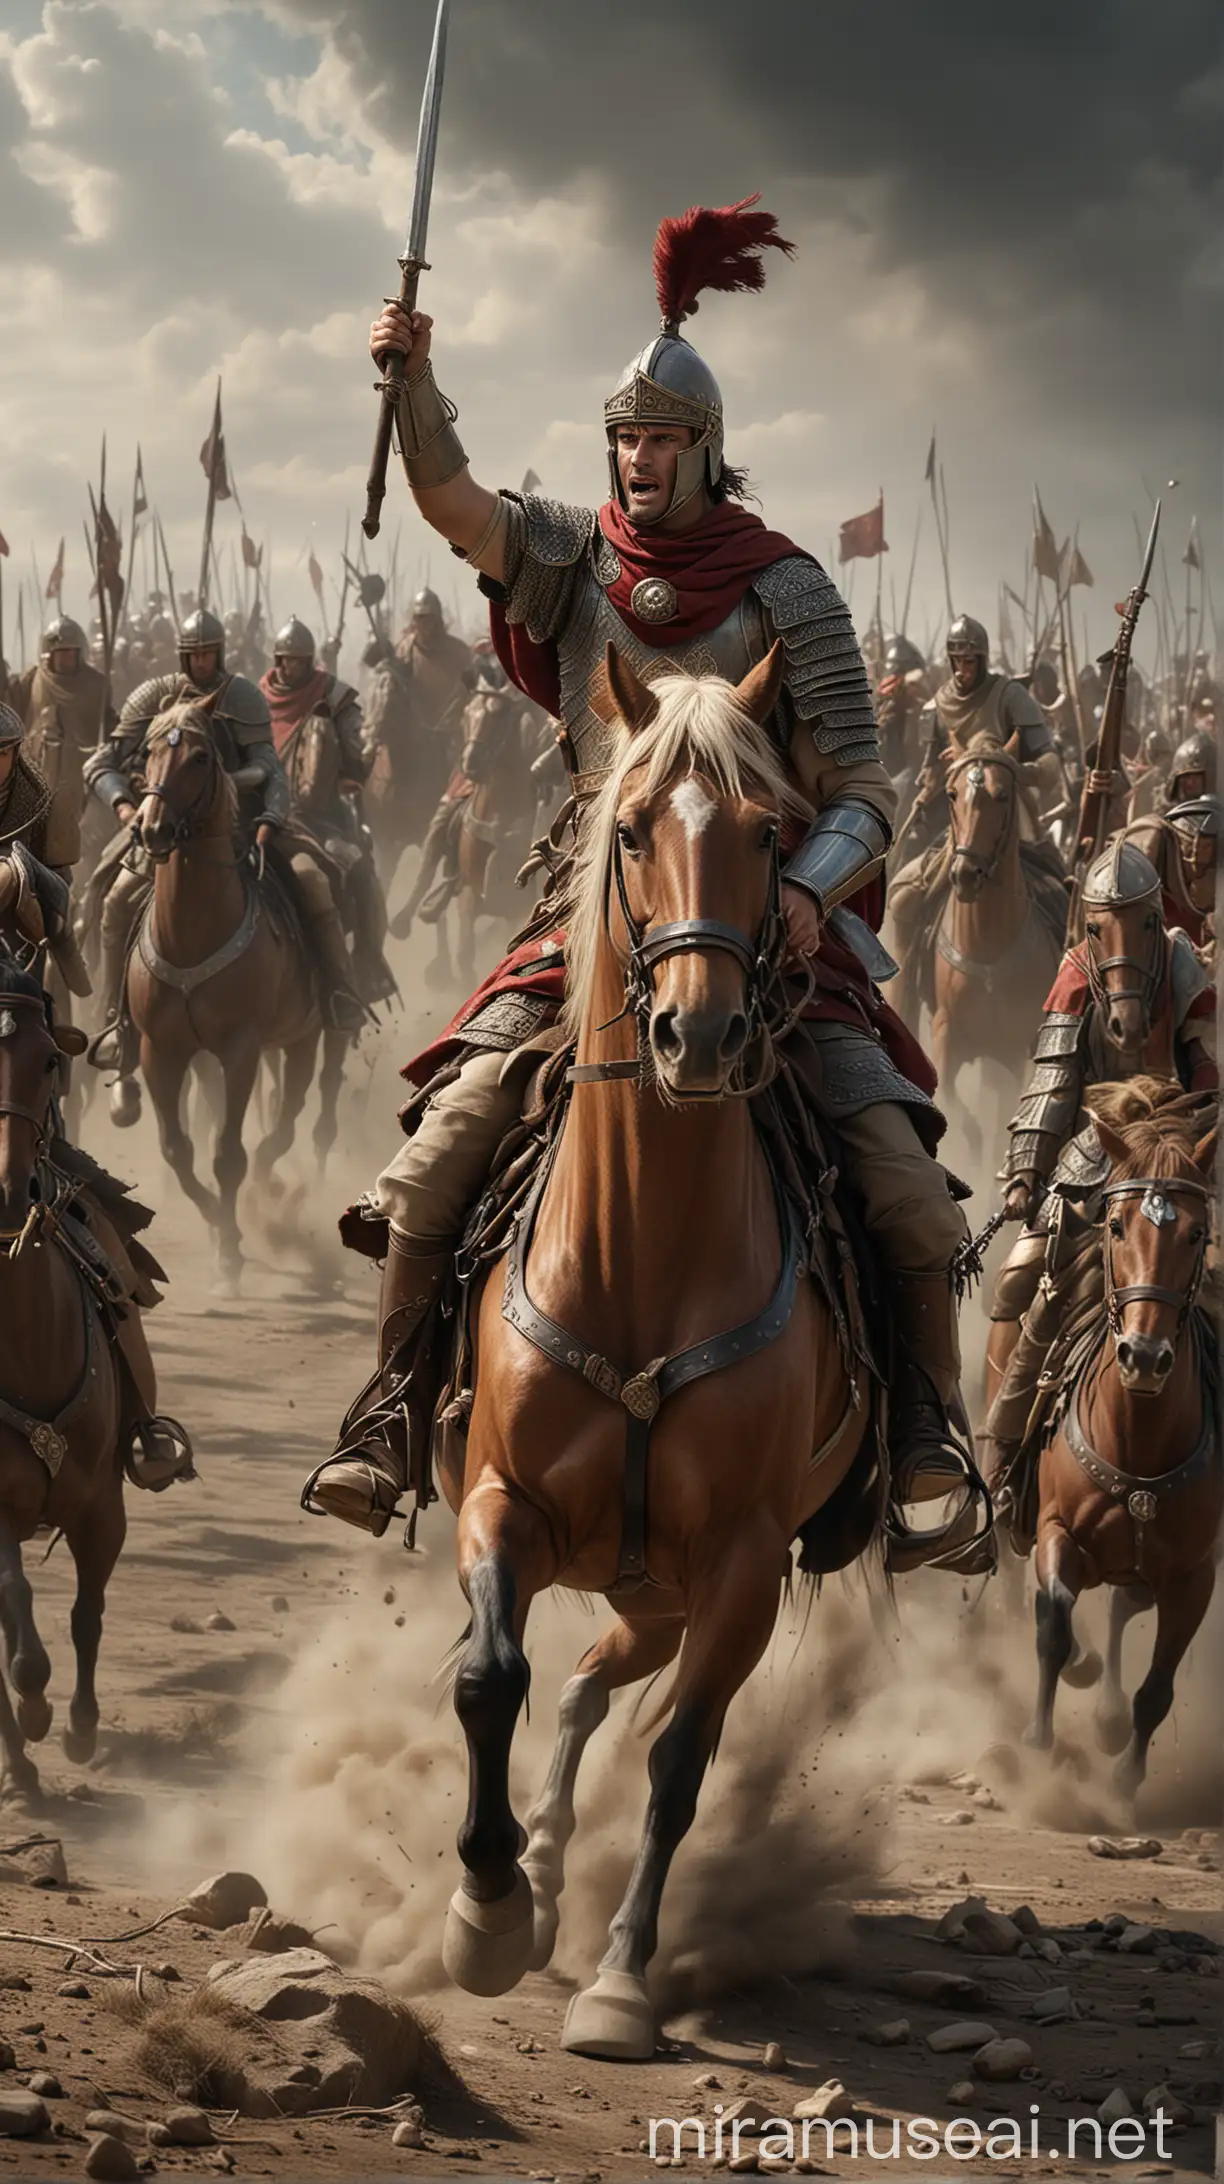 Alexander leading his troops into battle, charging on horseback. hyper realistic